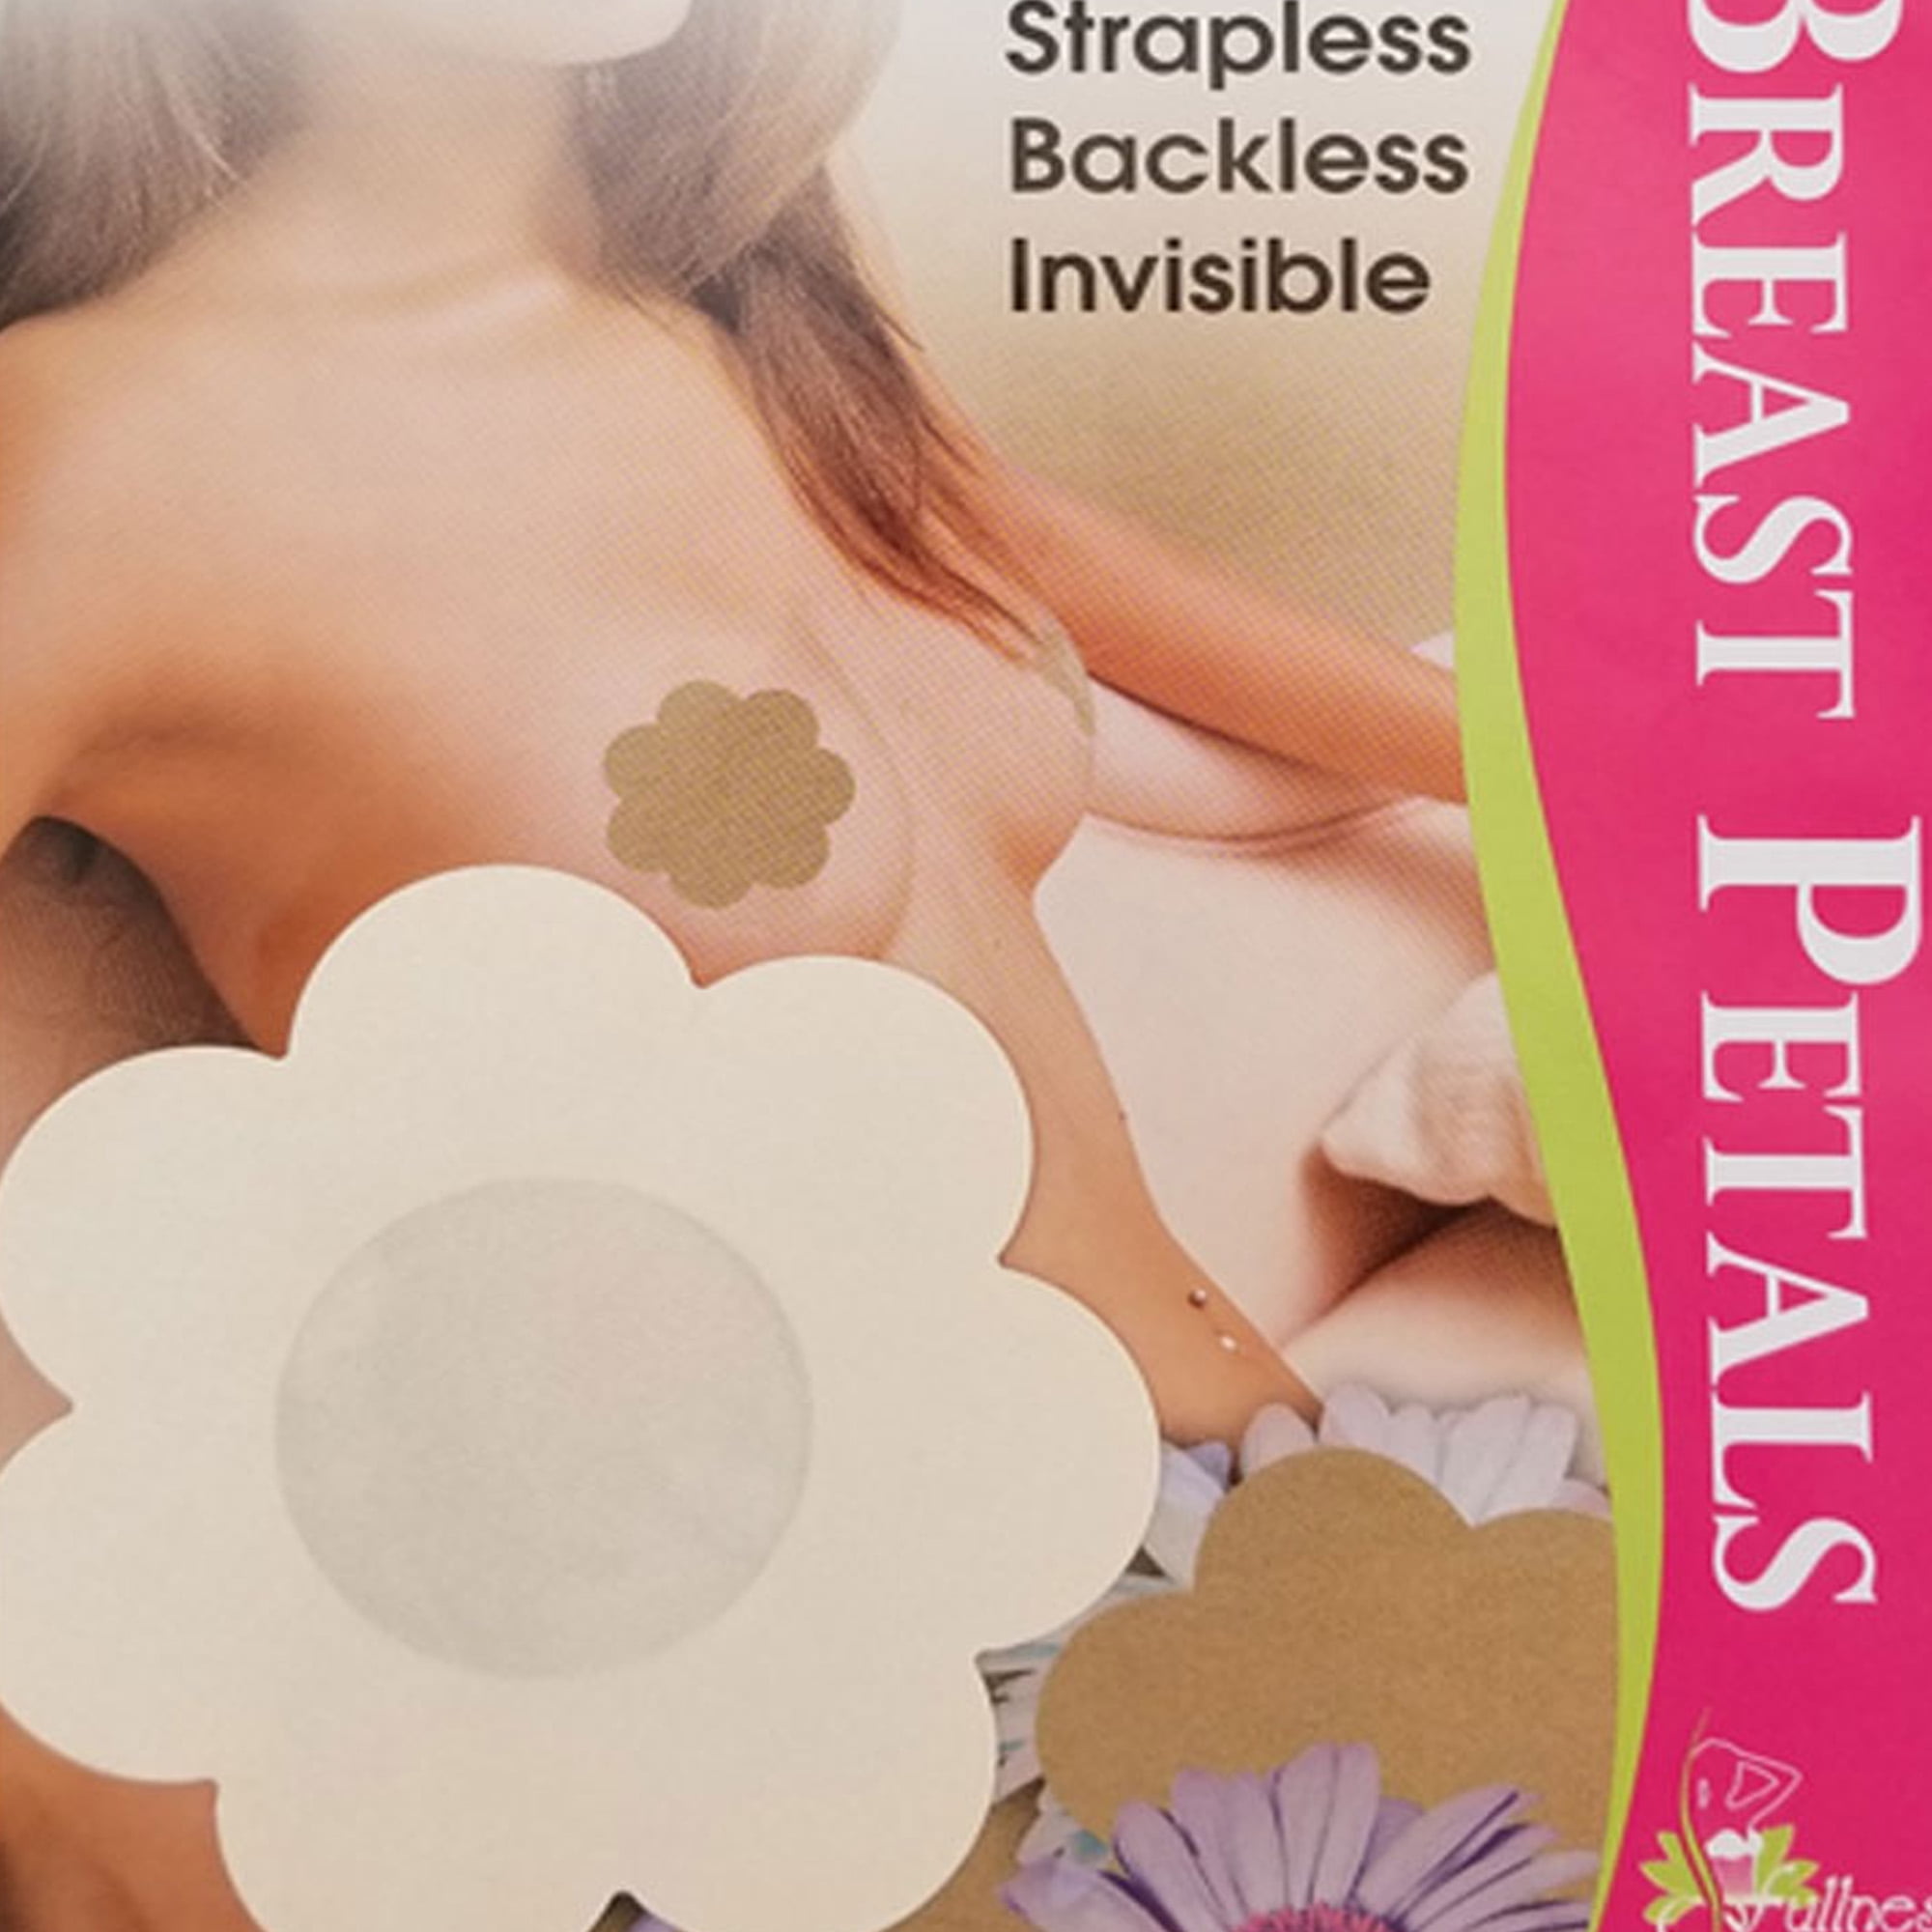 Reusable 4.5 Round Shape Adhesive Silicone Push Up Lift Pasties